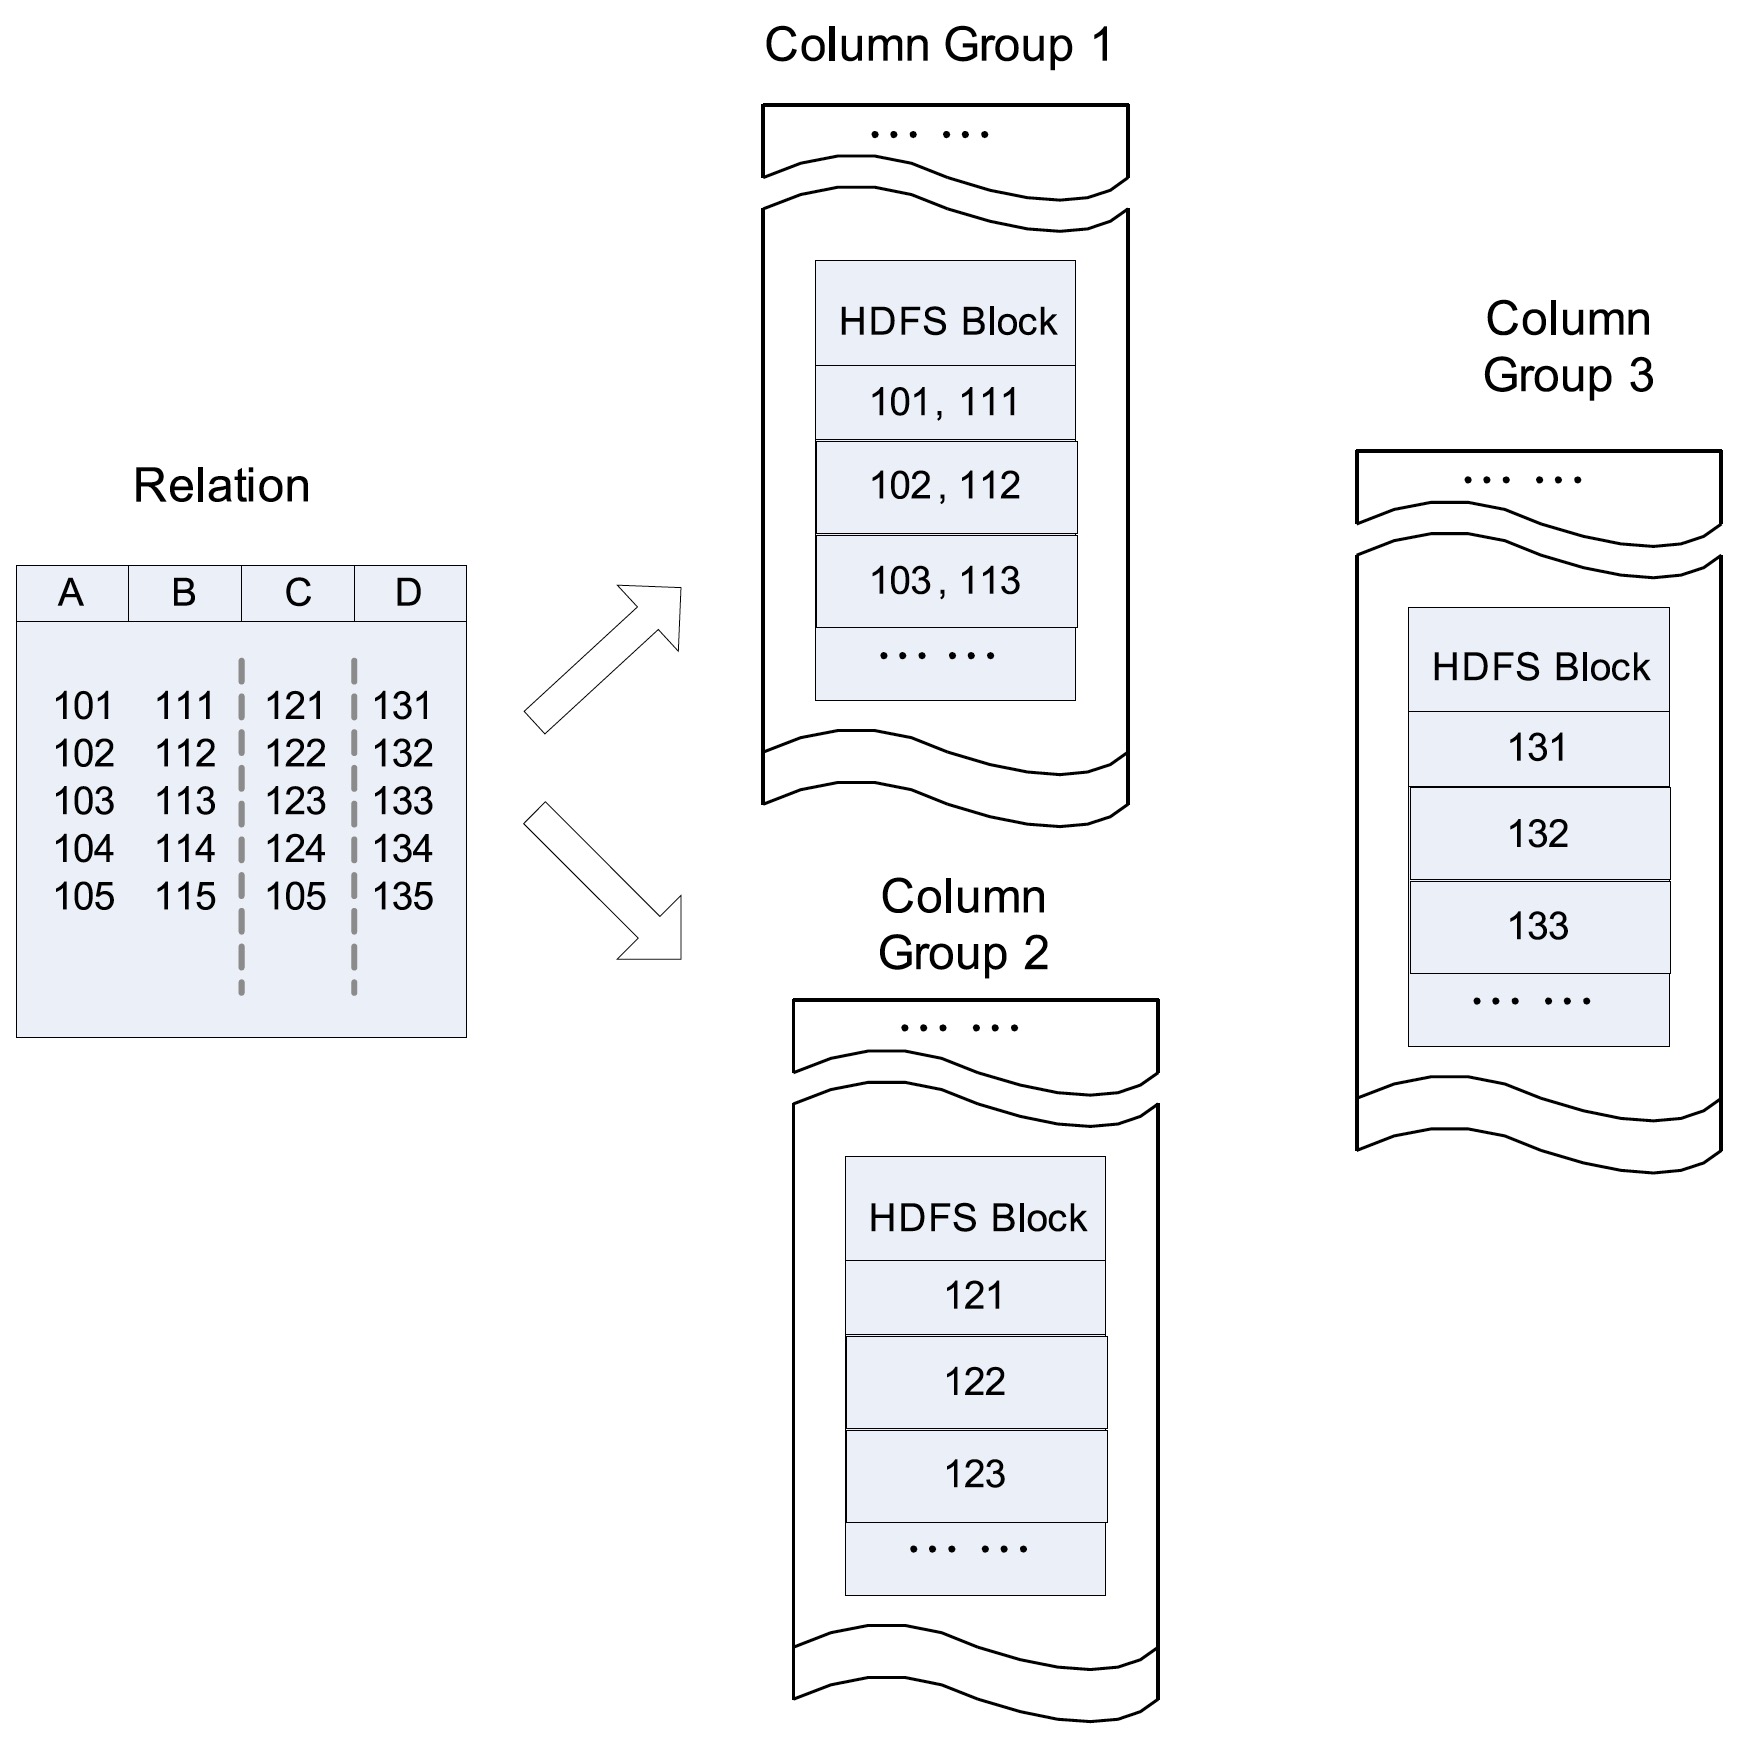 An example of column-group in an HDFS block